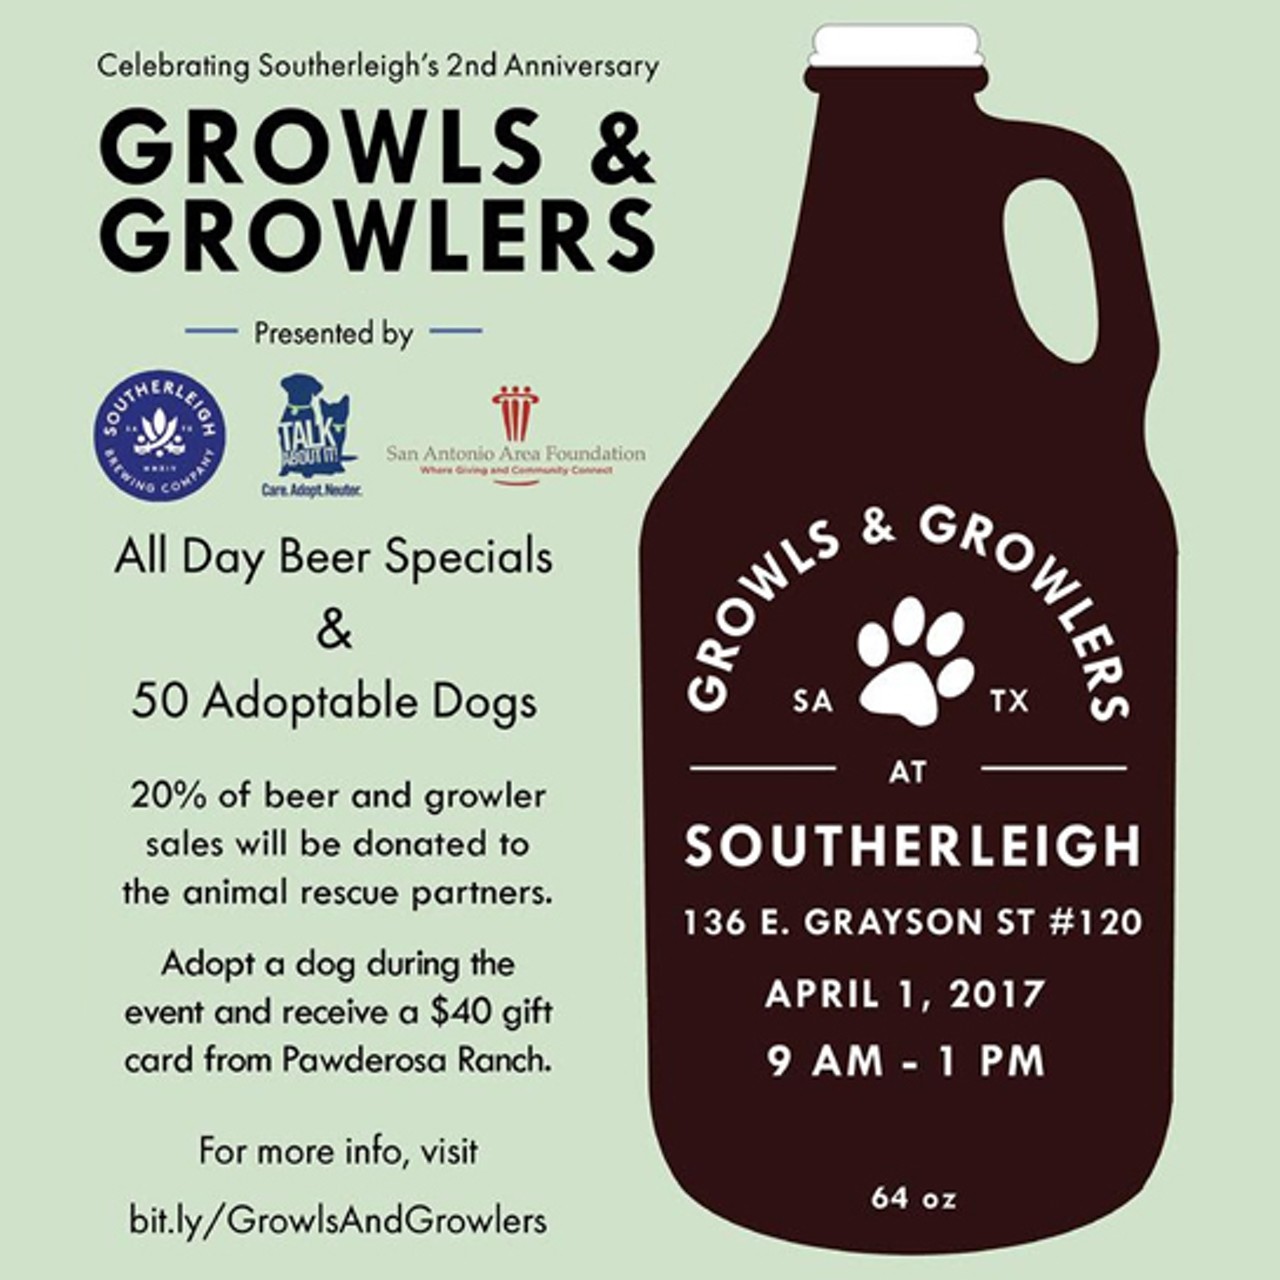 Growls and Growlers
Sat., April 1, 9 a.m.-1 p.m. at Southerleigh Fine Food and Brewery